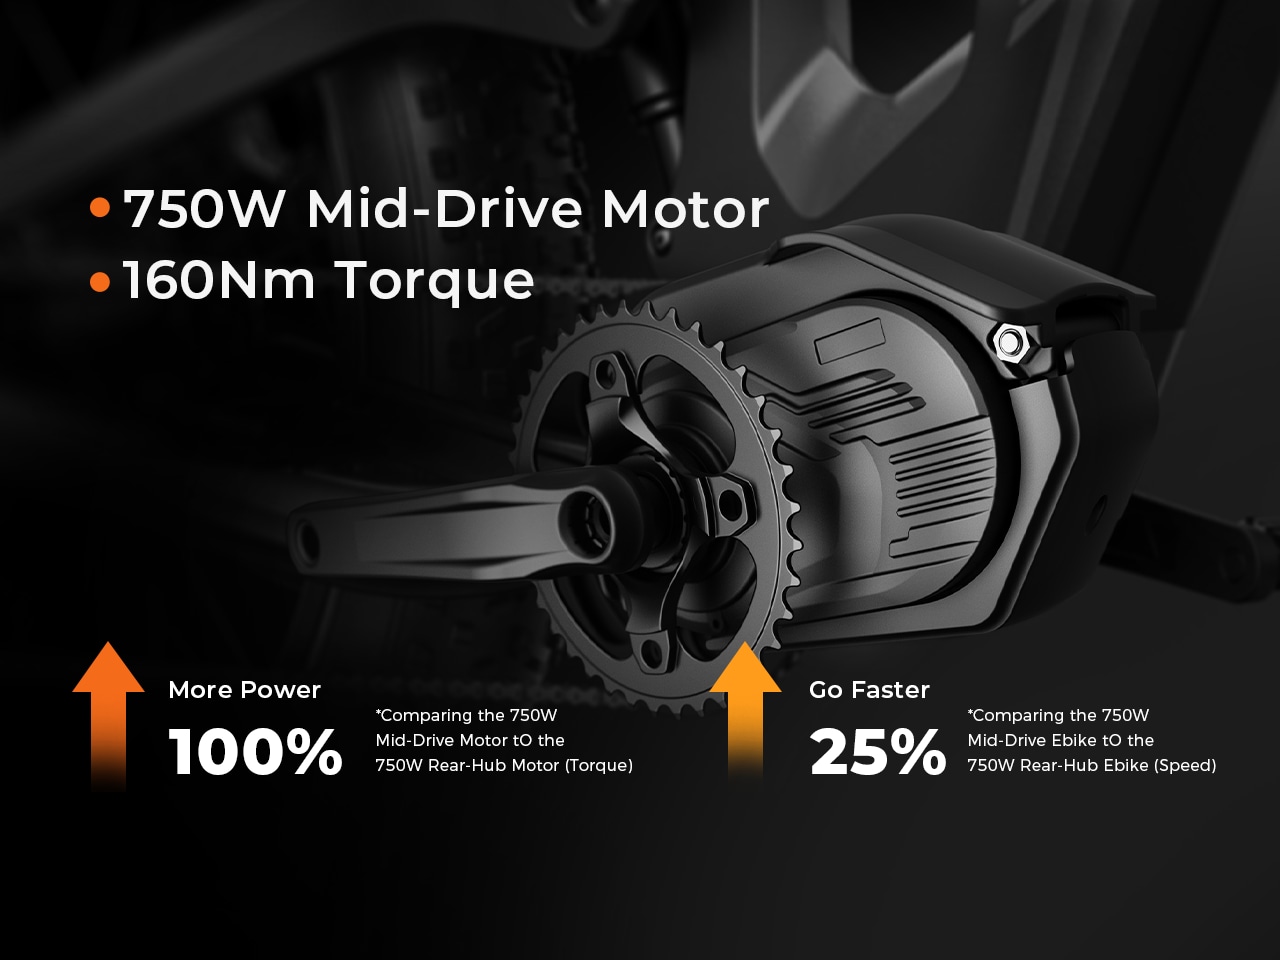 HERO rises with a 750W mid-drive, 160Nm torque, and torque sensor for precise control. Conquer diverse terrains with optimal weight distribution, power transfer, extended range, and enhanced torque.